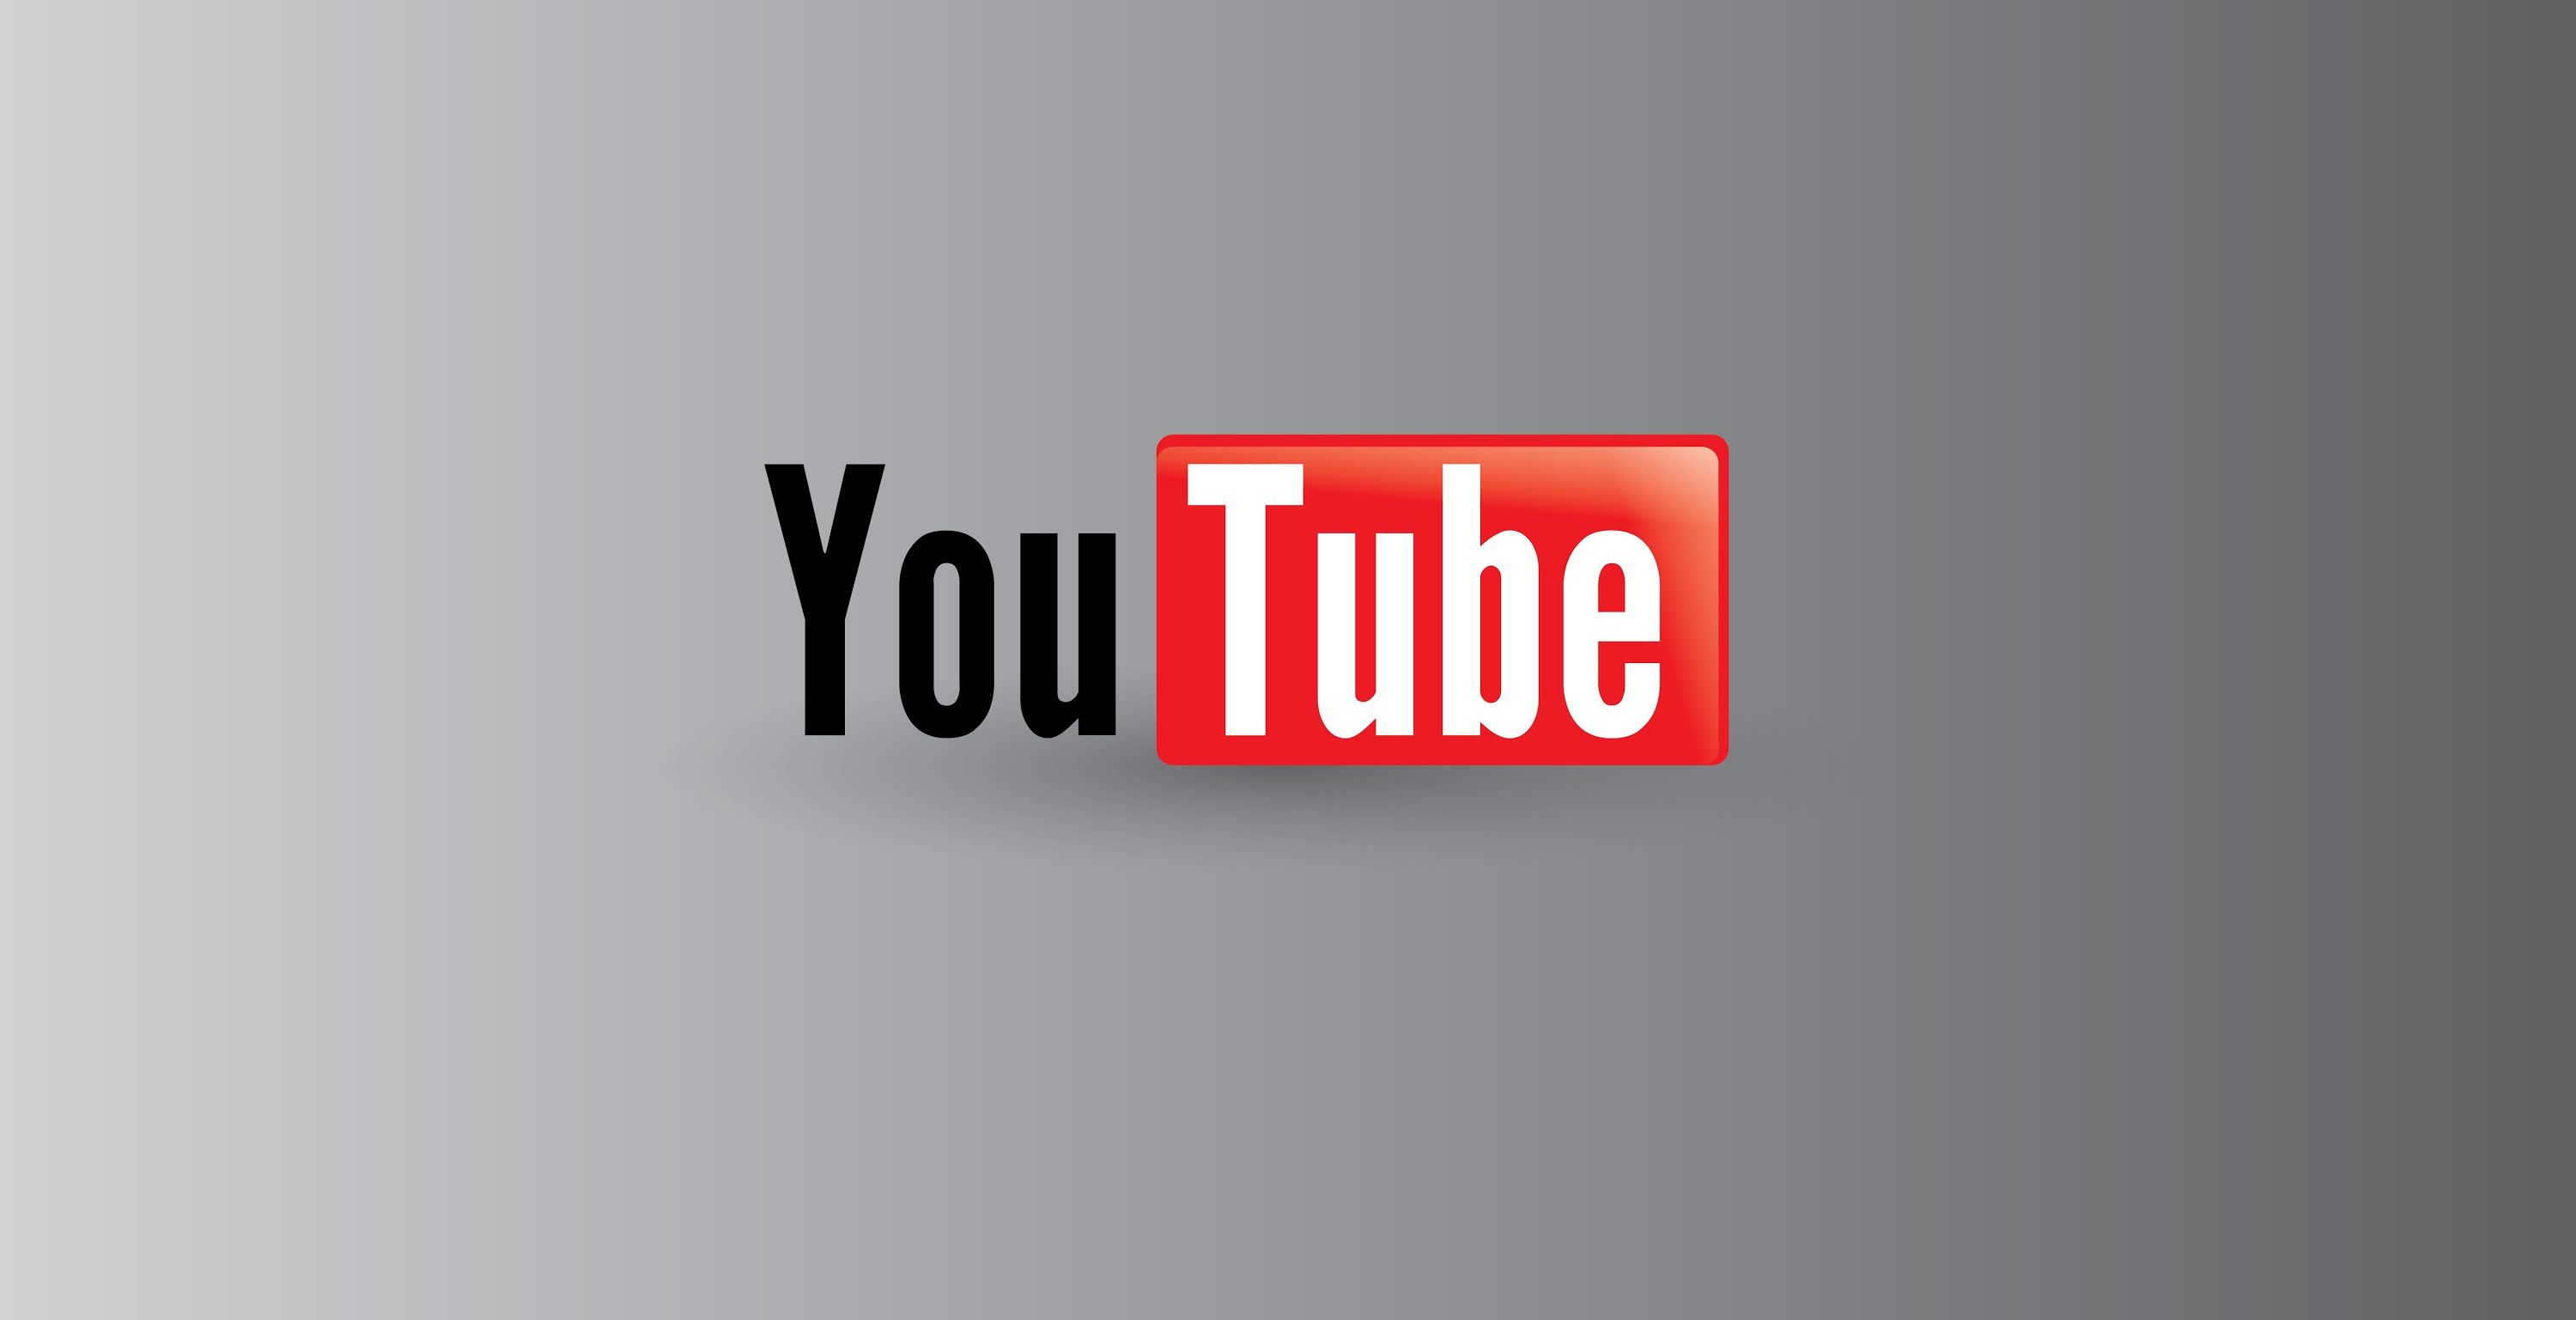 youtube free download 1080p